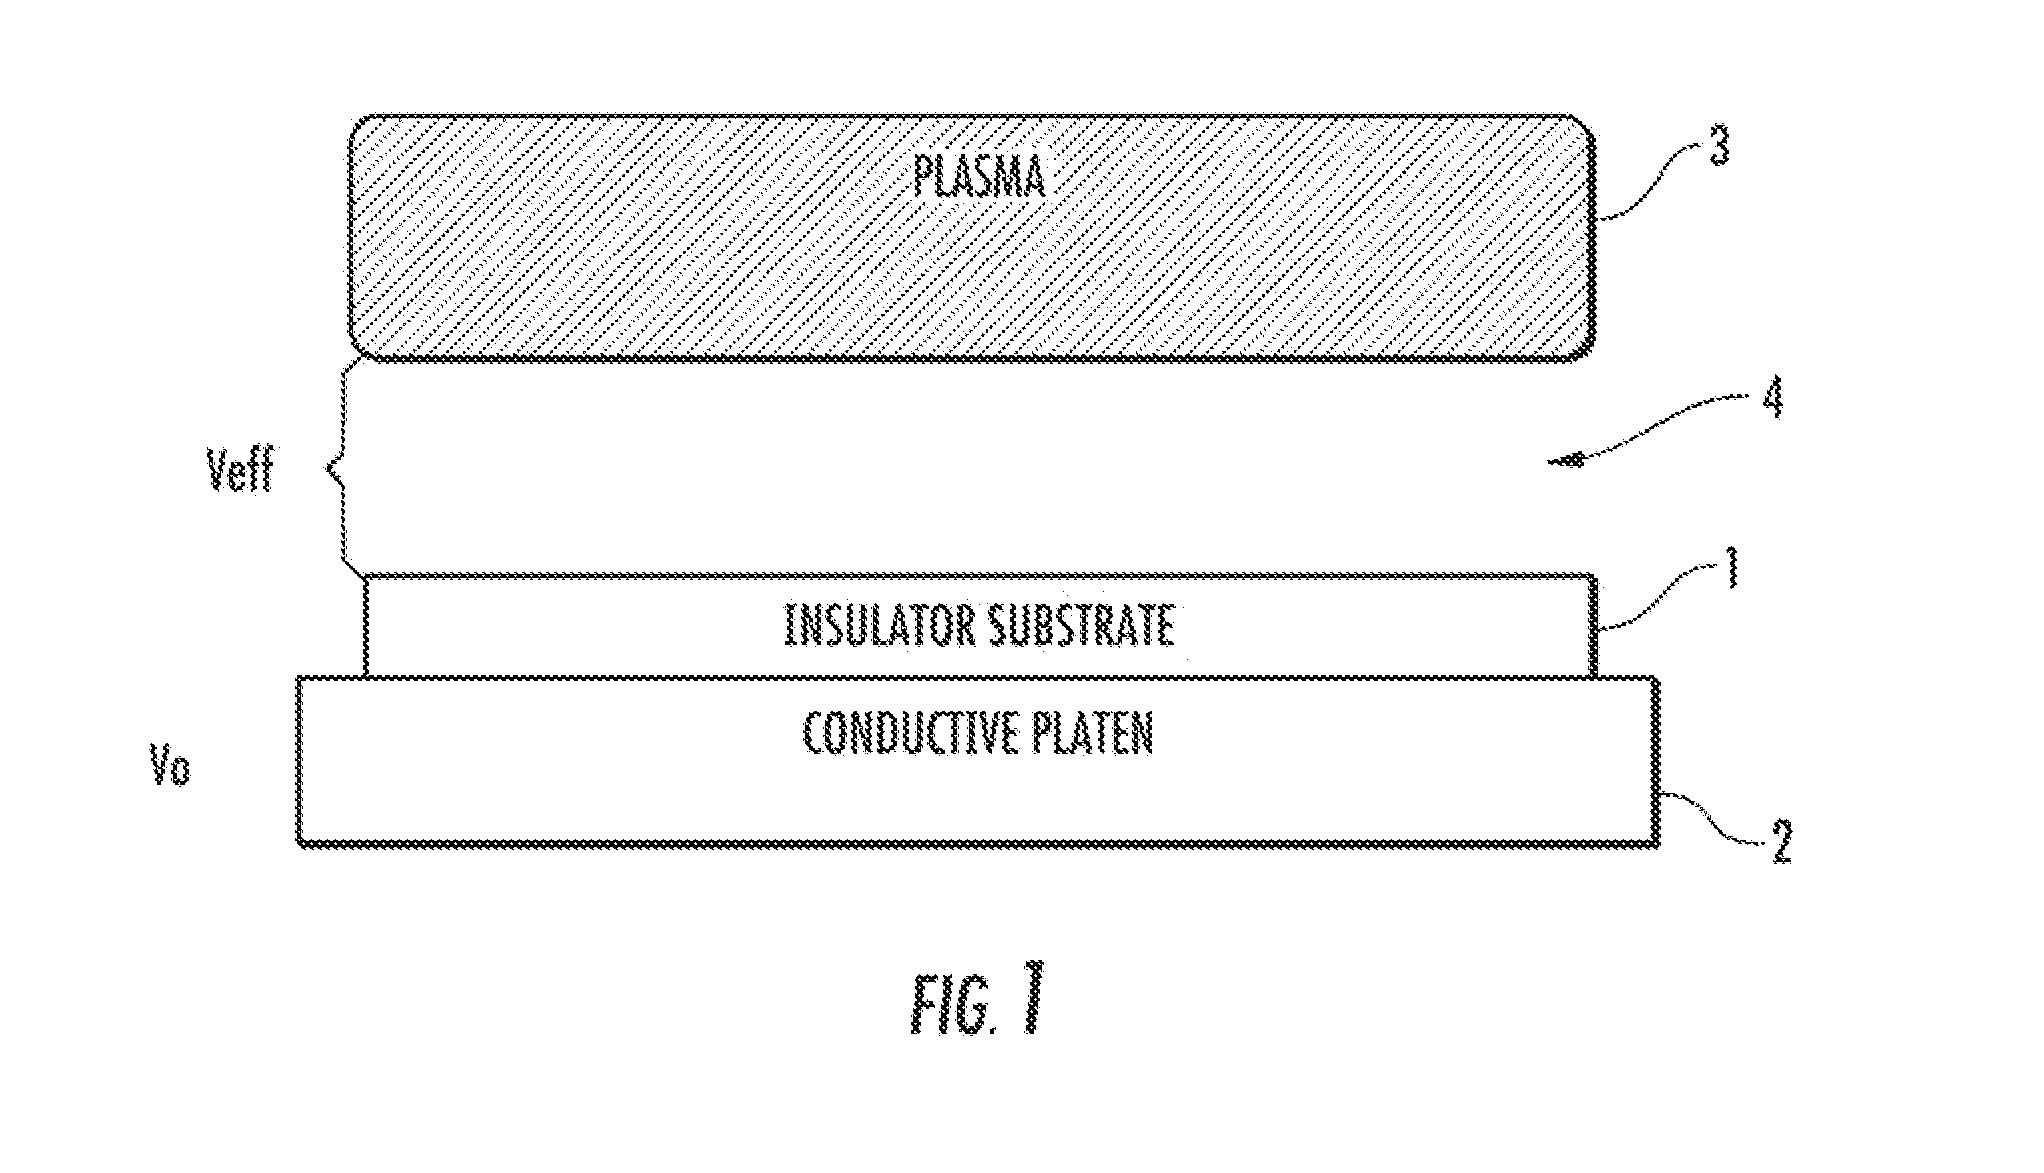 Control apparatus for plasma immersion ion implantation of a dielectric substrate